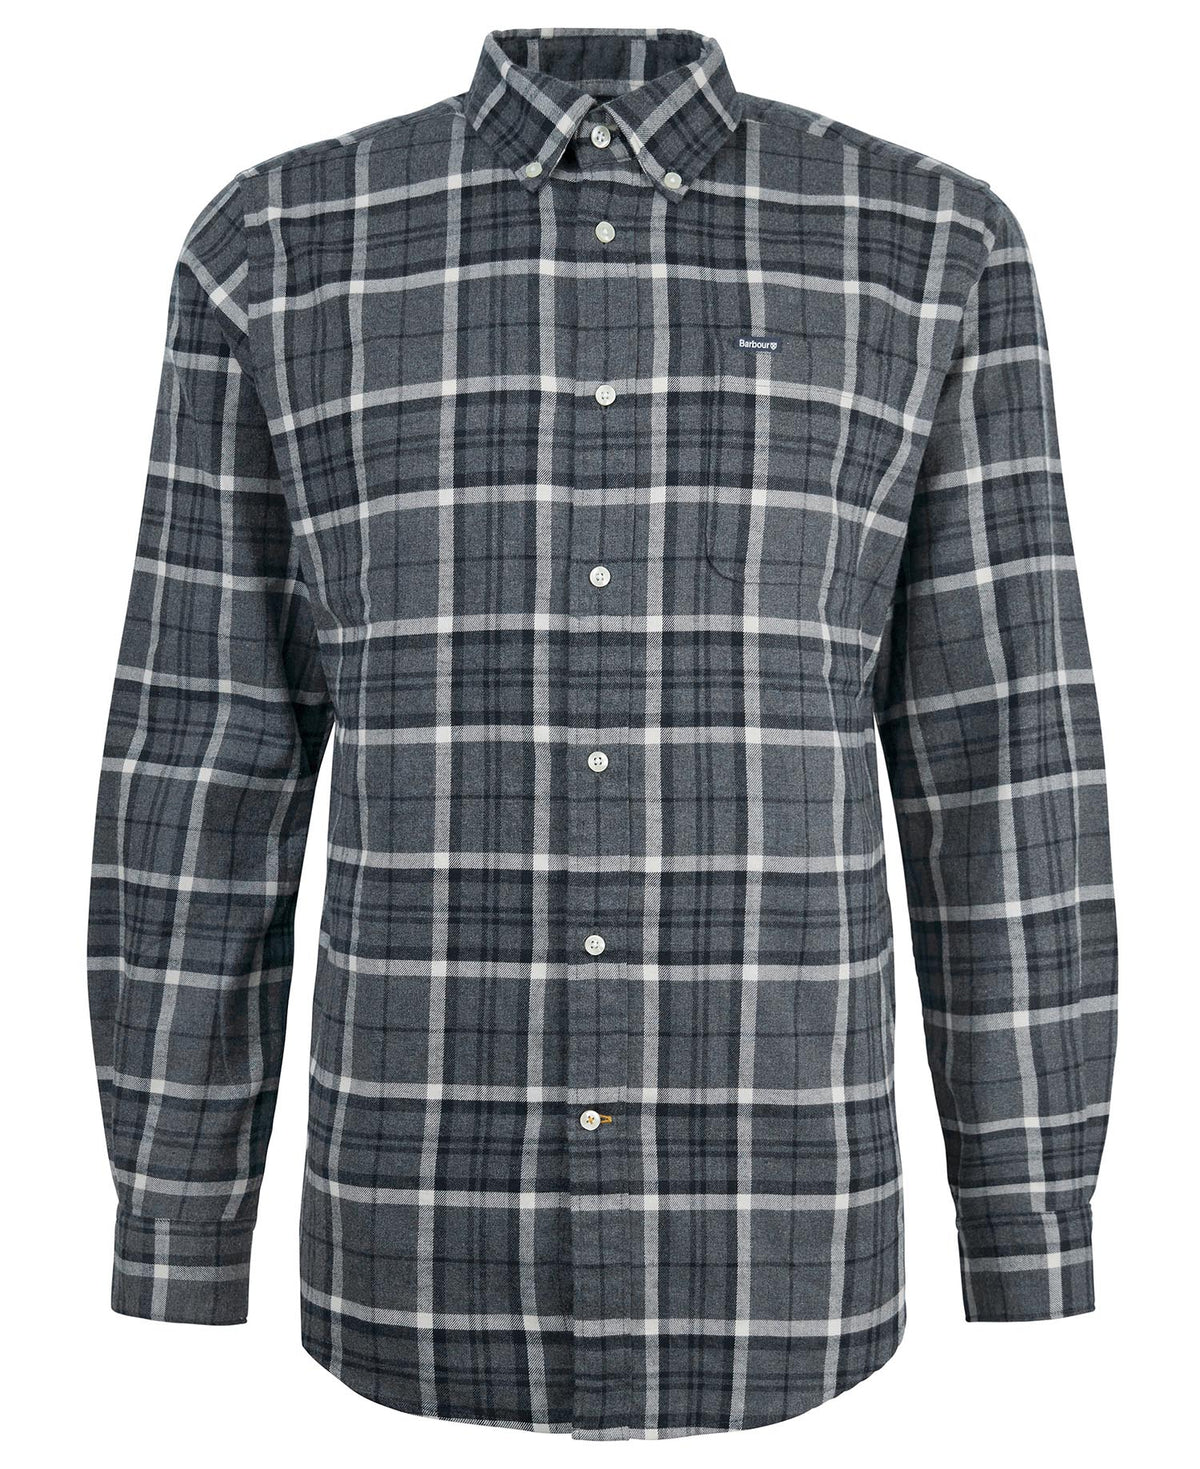 Barbour Swinton Tailored Shirt MSH5390GY52